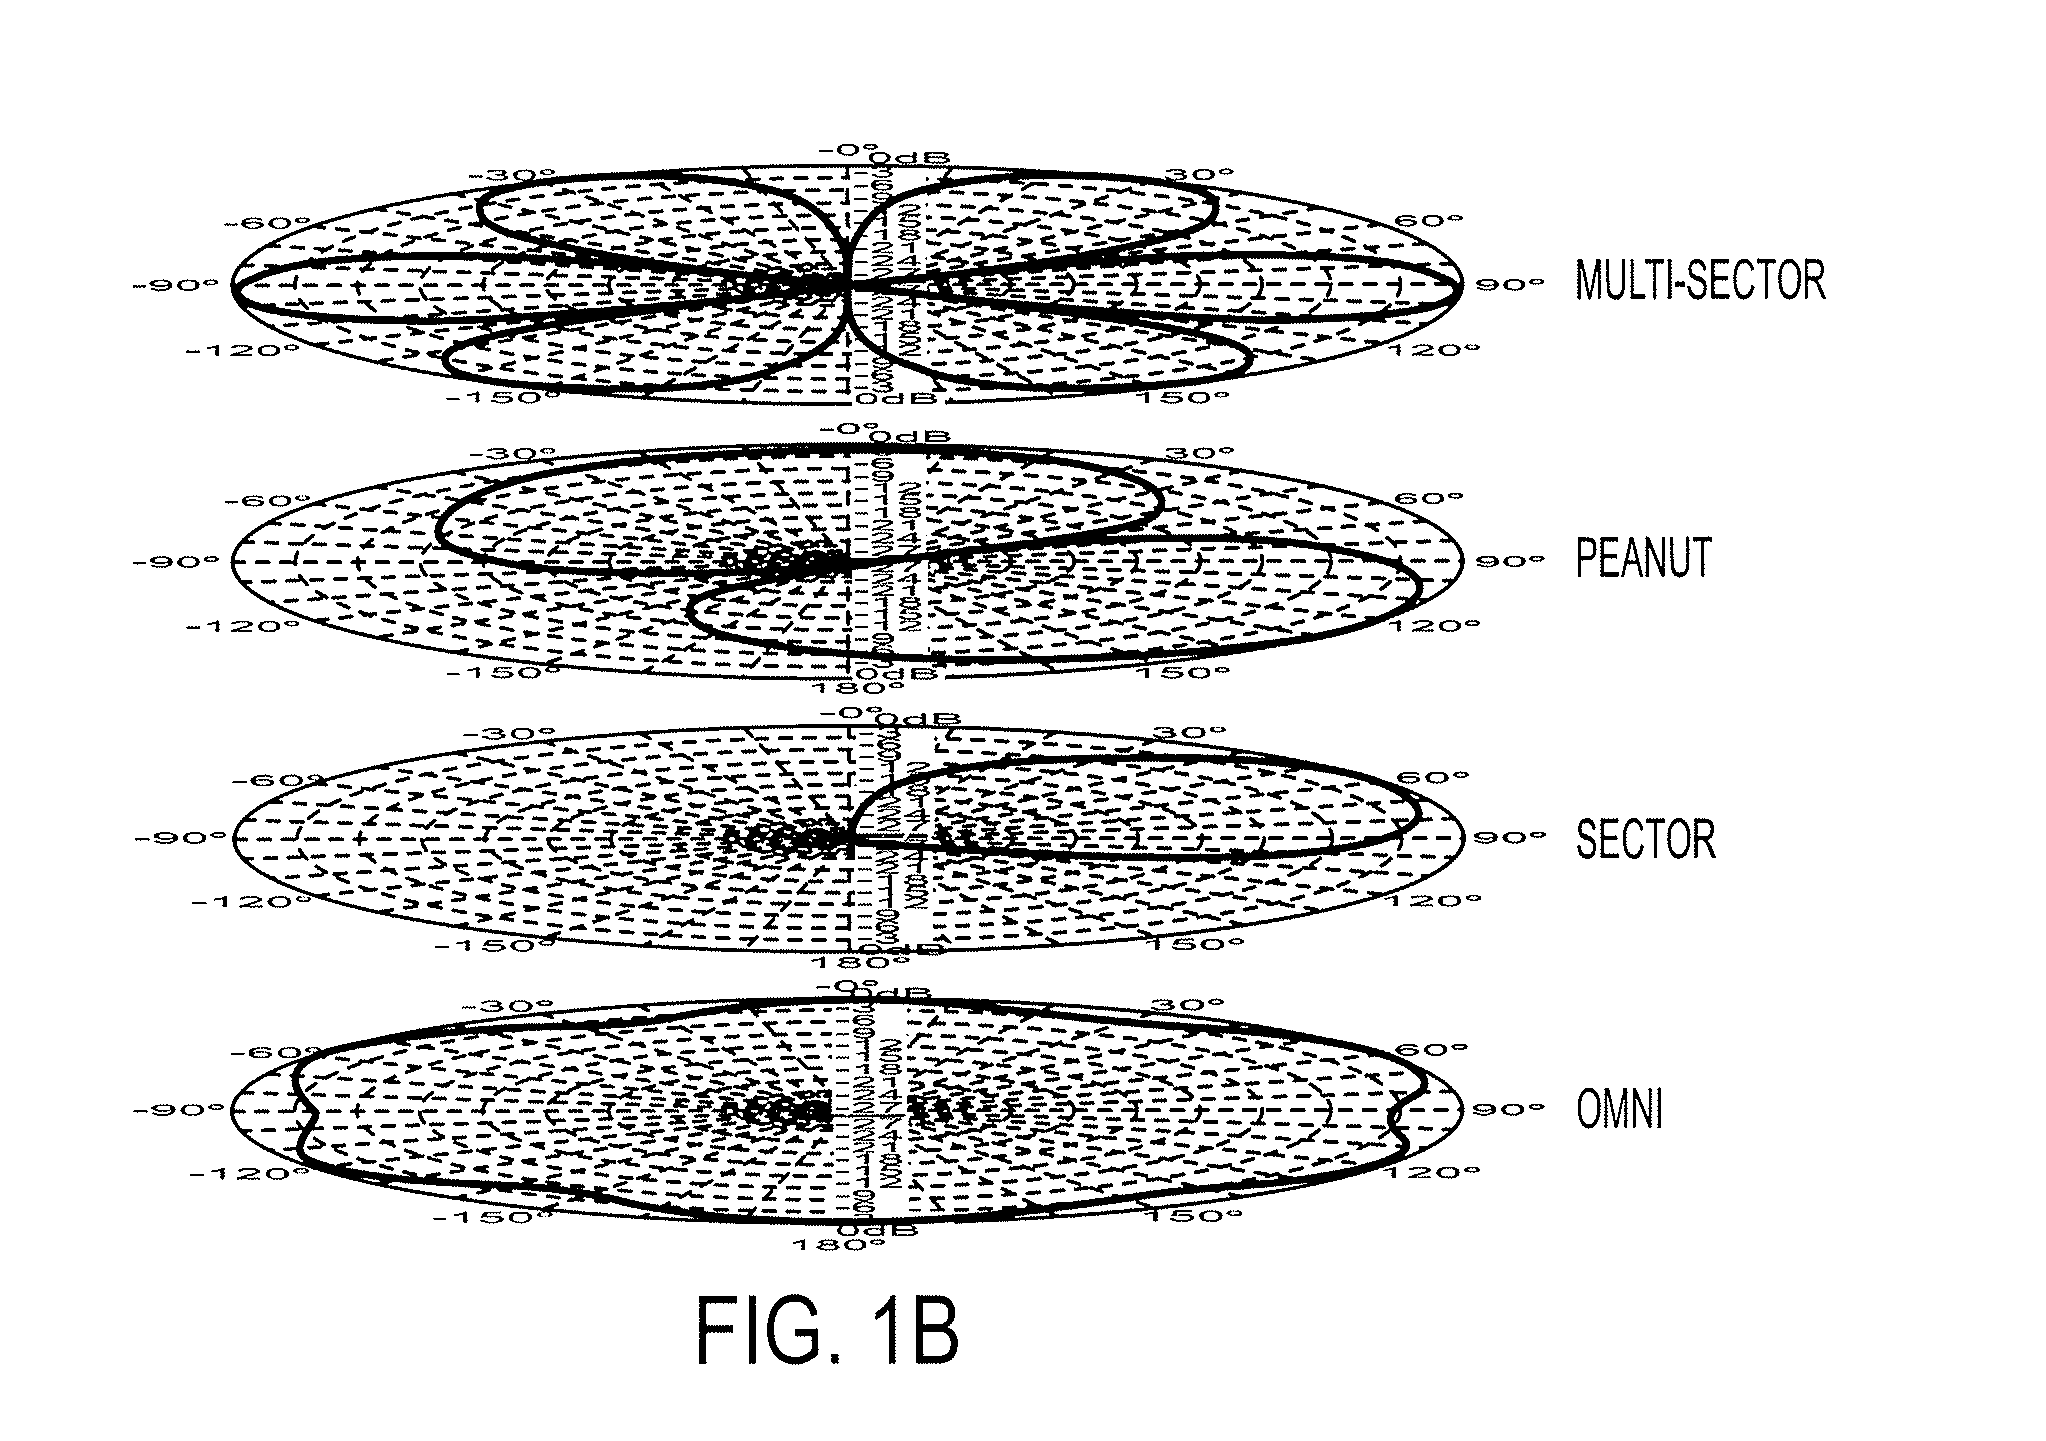 Circular base station antenna array and method of reconfiguring a radiation pattern